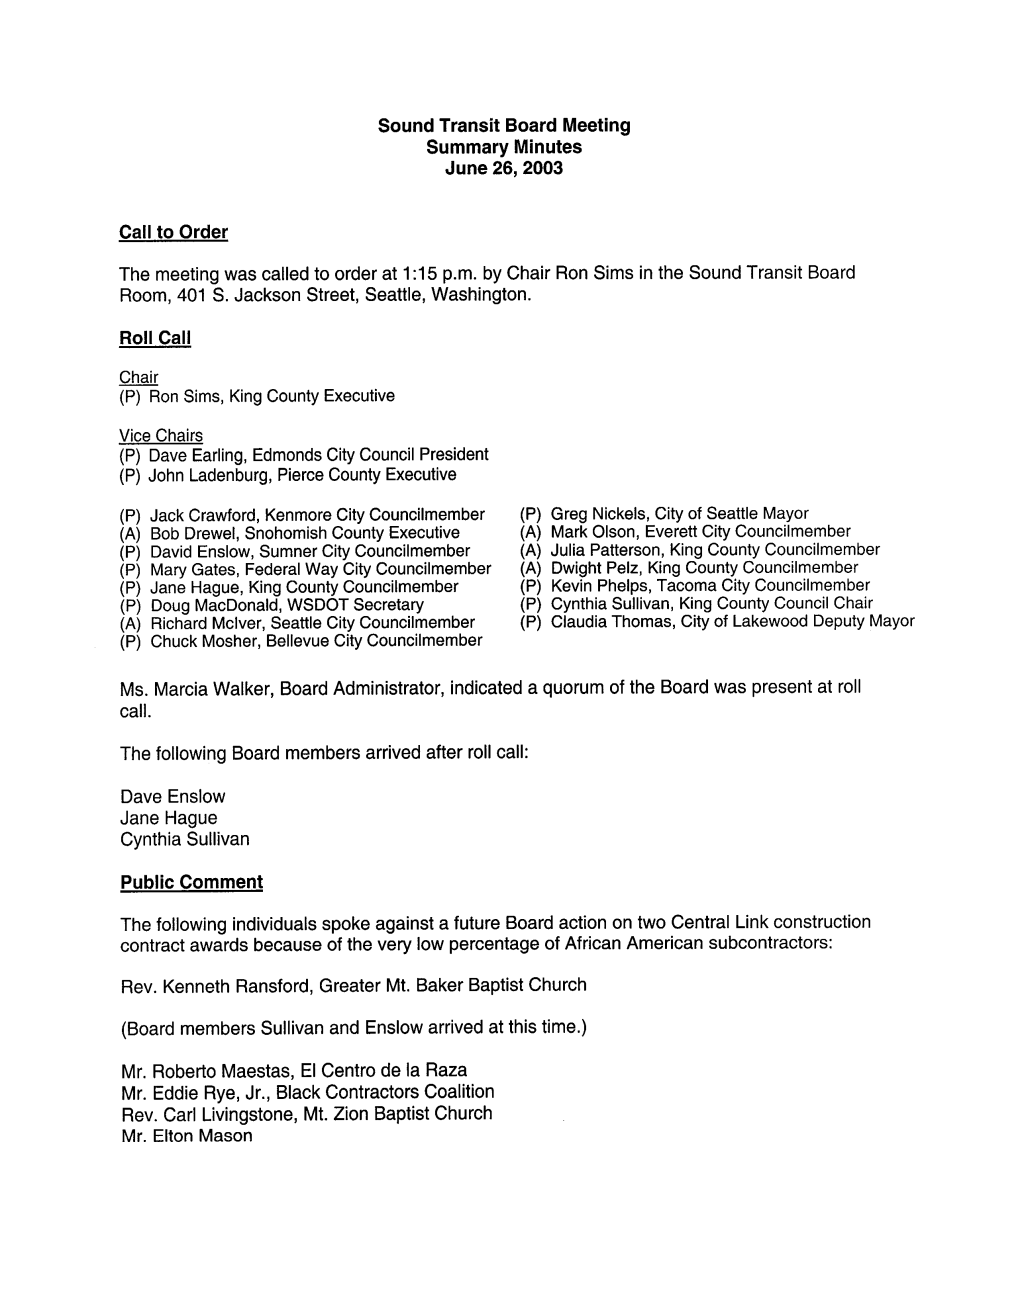 Sound Transit Board Meeting Summary Minutes June 26,2003